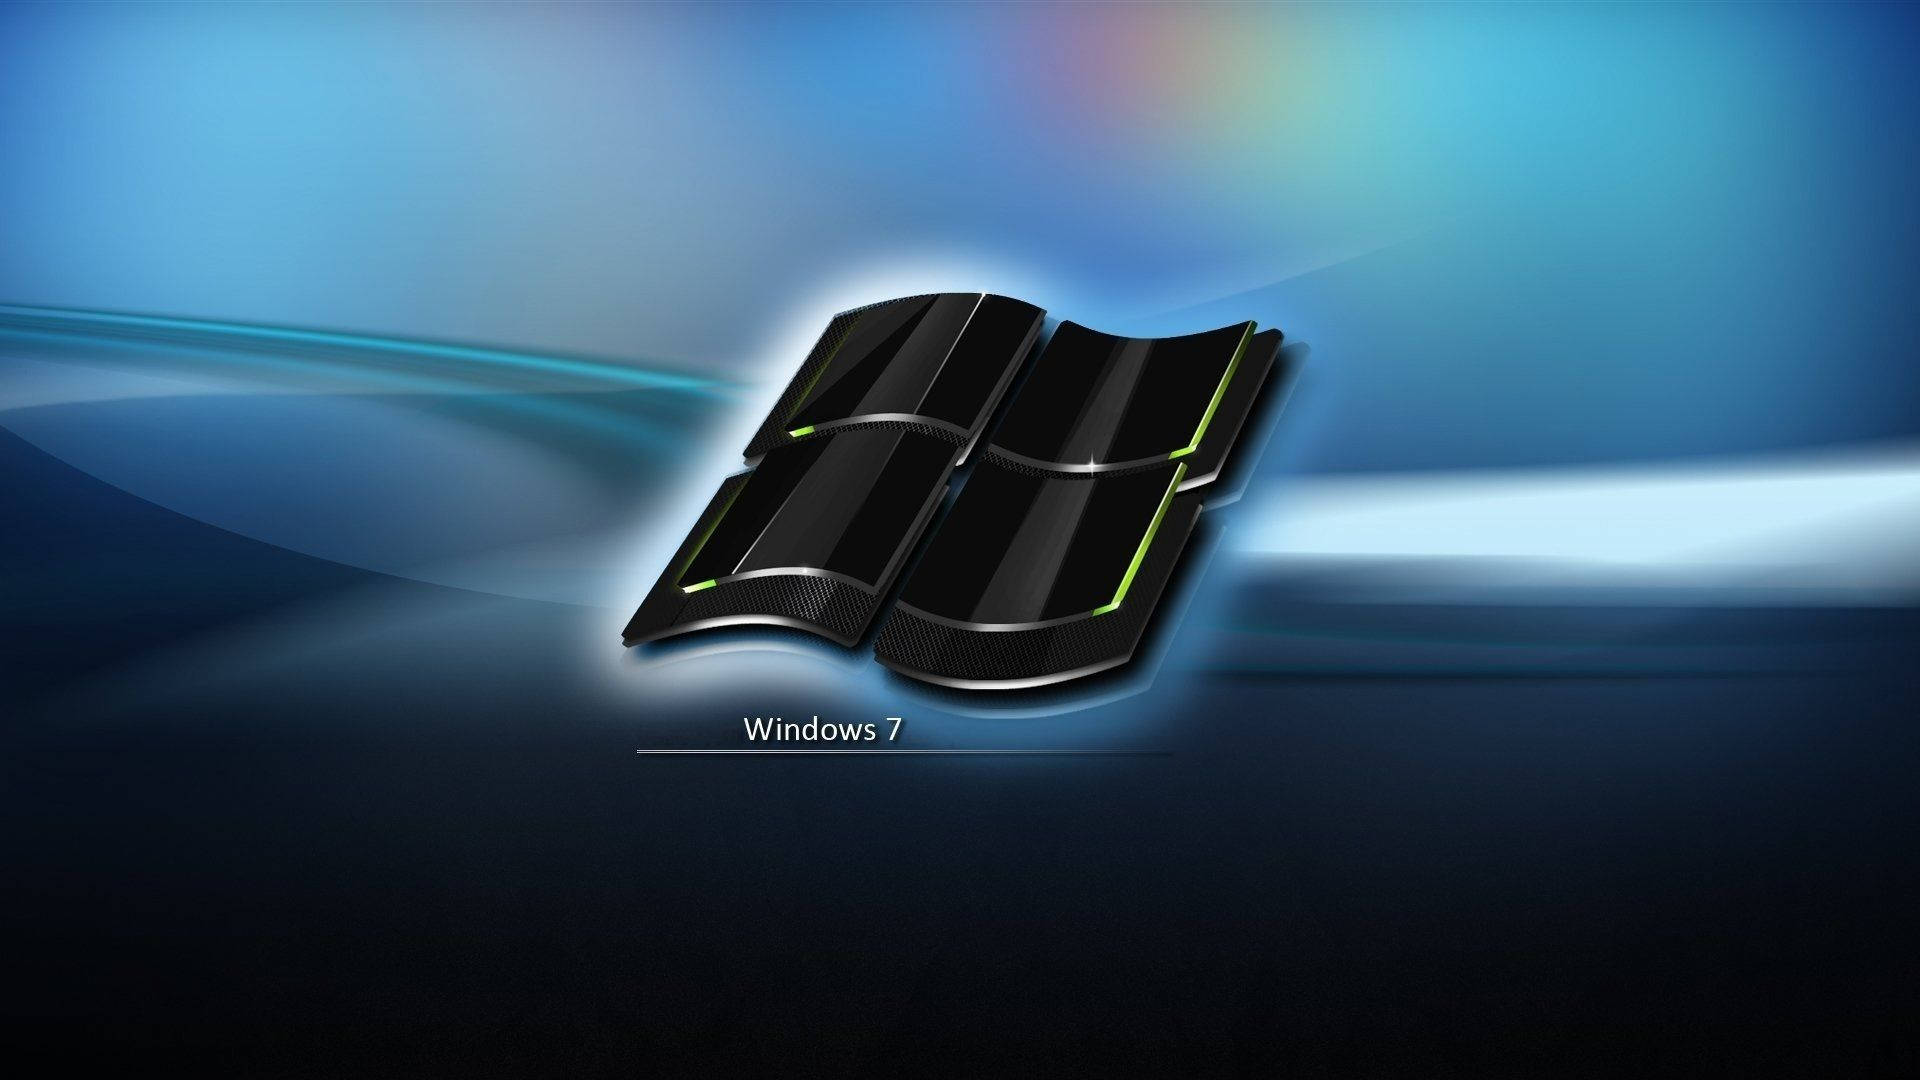 The Official Logo of Microsoft Windows 7 Wallpaper